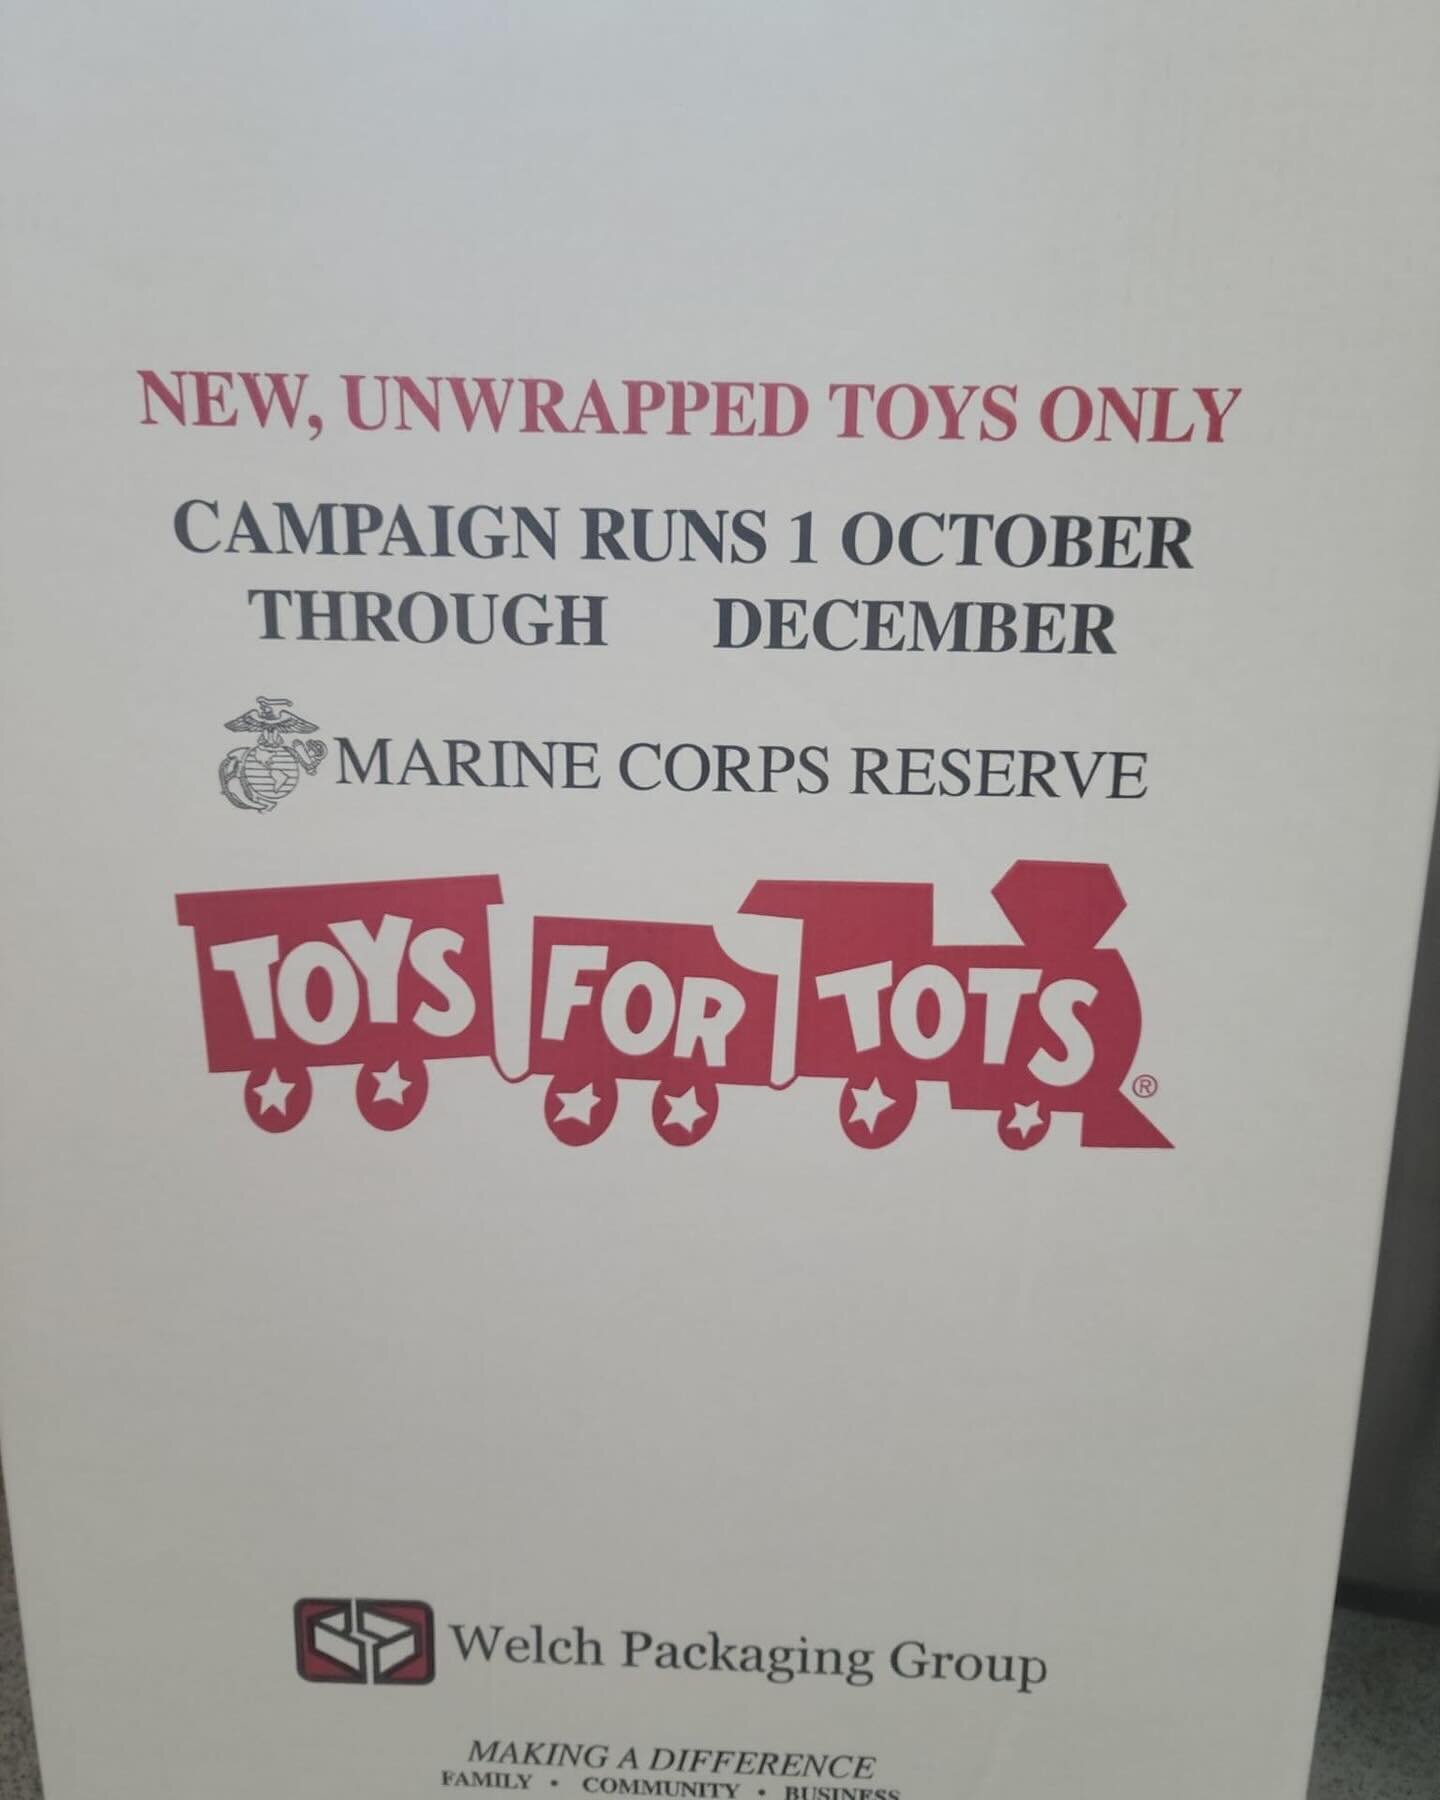 We are happy to announce we are a Toys For Tots drop off this year. Come bring your unwrapped toys to Lavish Hair Studio. 
Let's bring some joy to kids this Holiday season